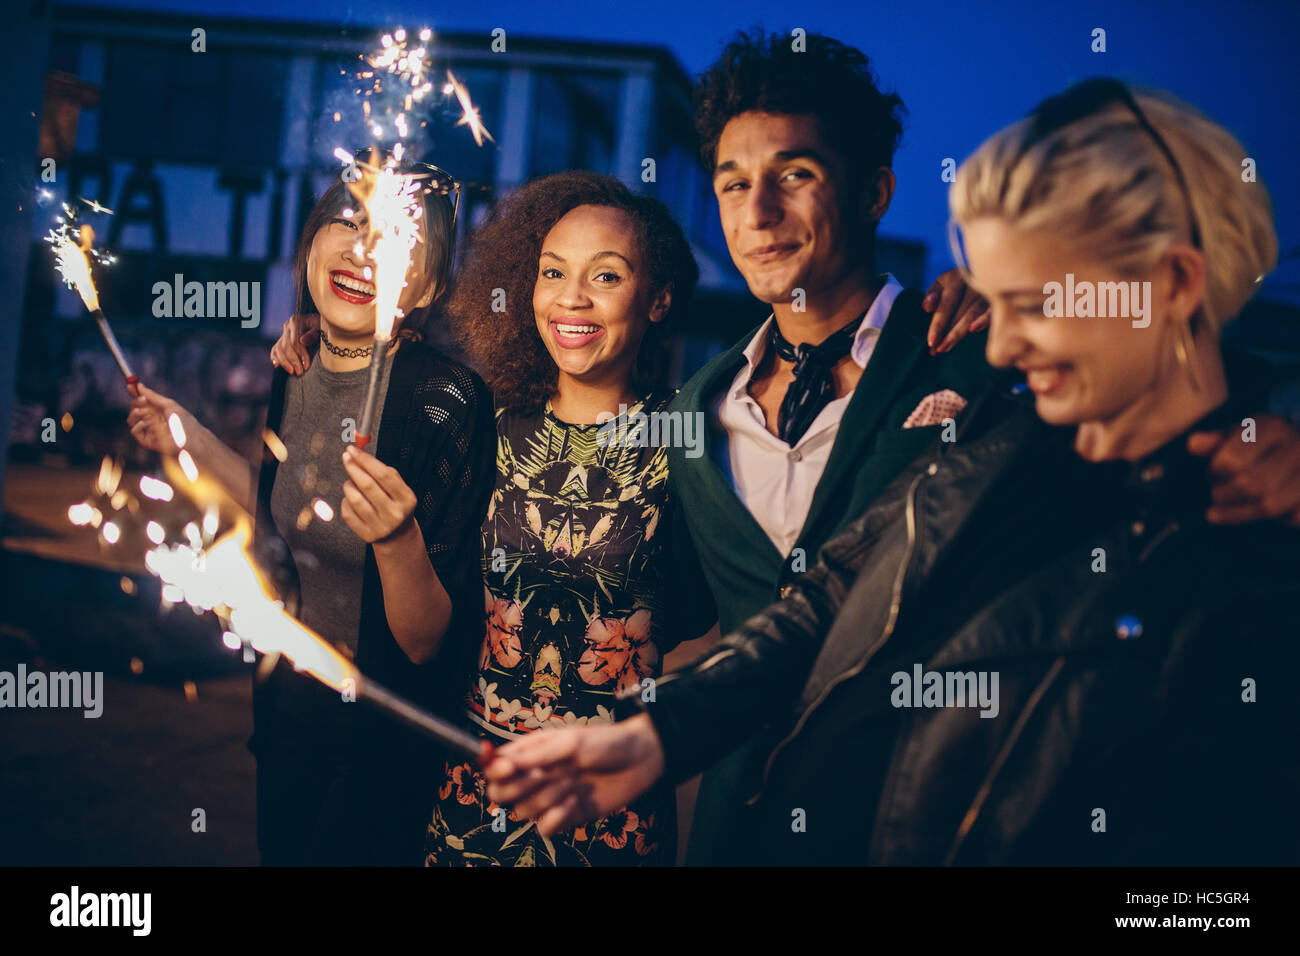 Shot of young friends at night with fireworks enjoying party. Group of friends with sparklers on road in evening. Stock Photo